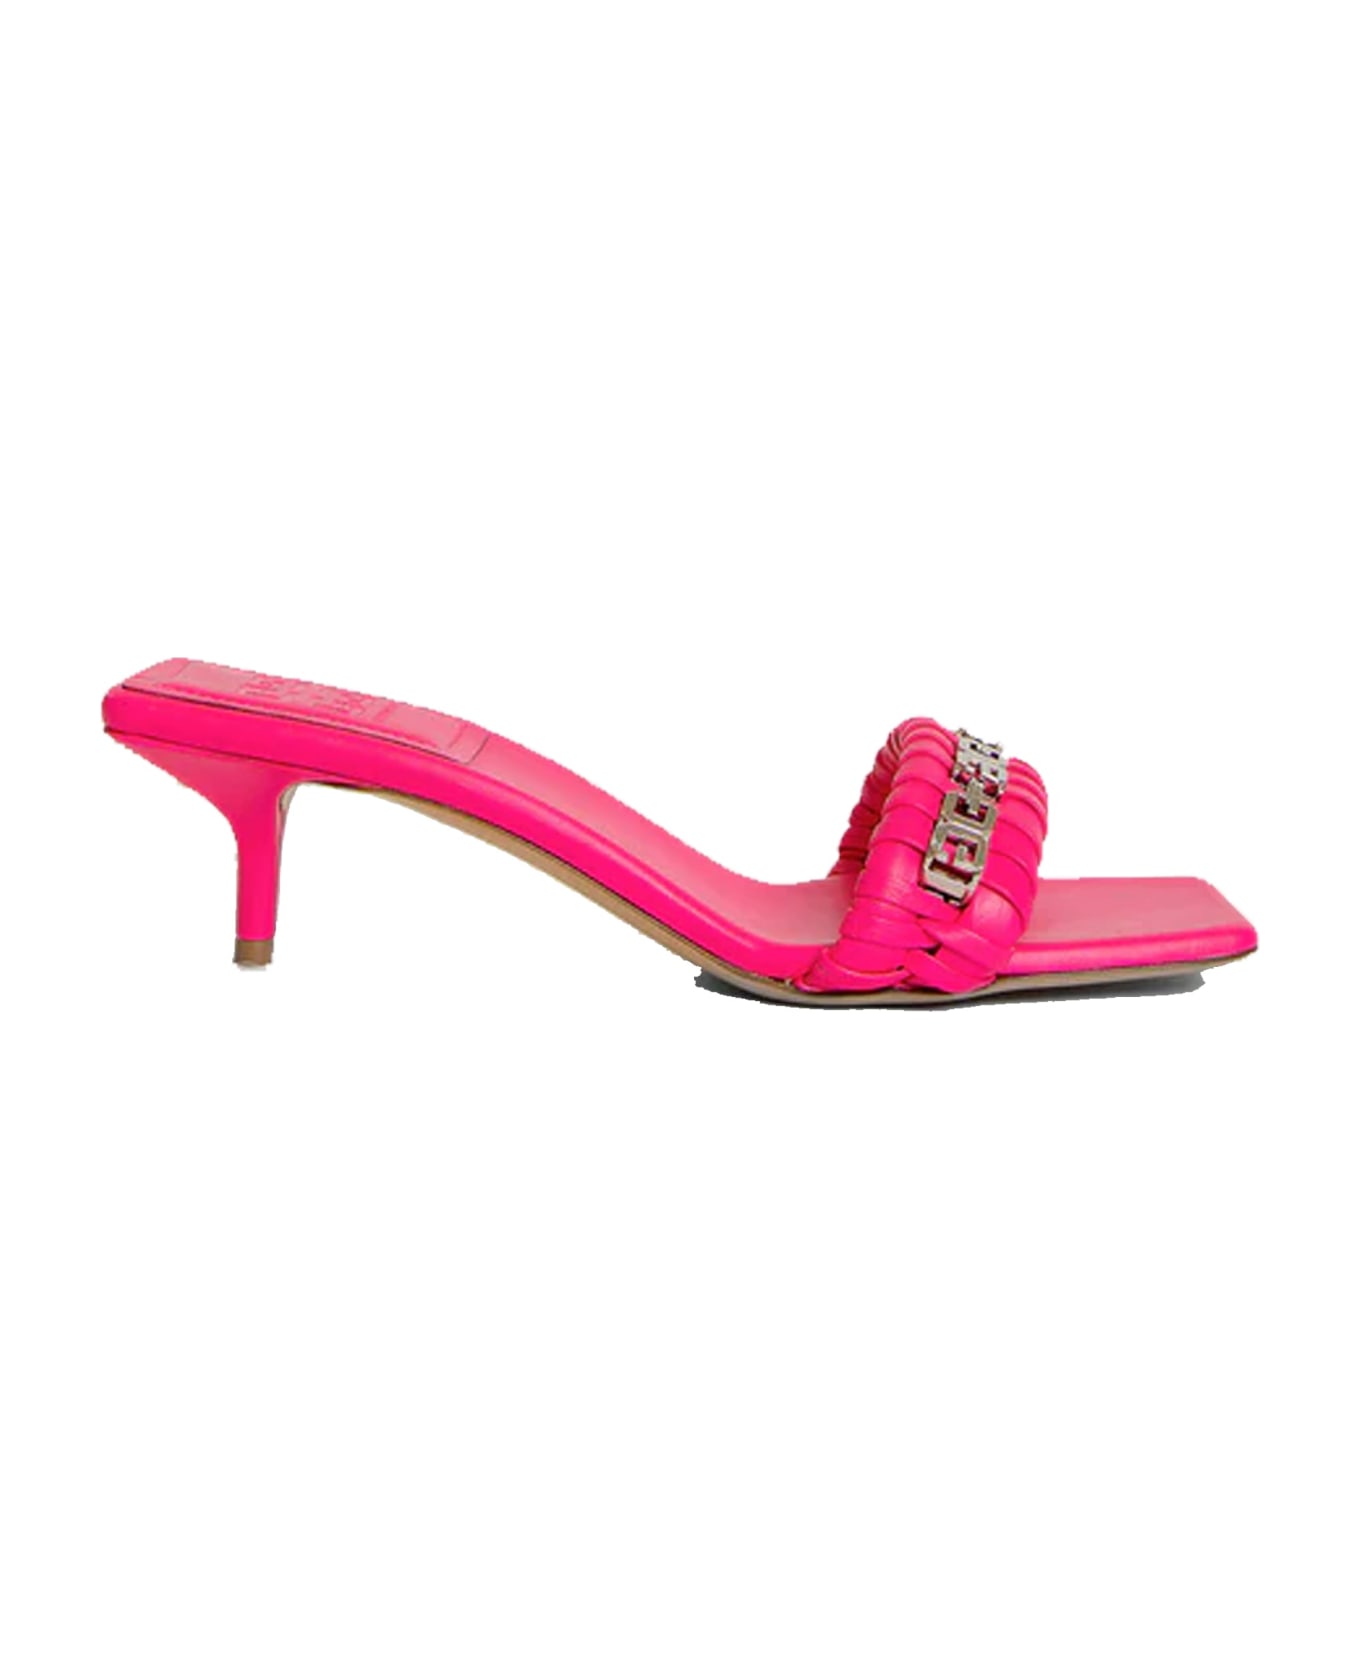 Givenchy Leather Sandals - Pink サンダル